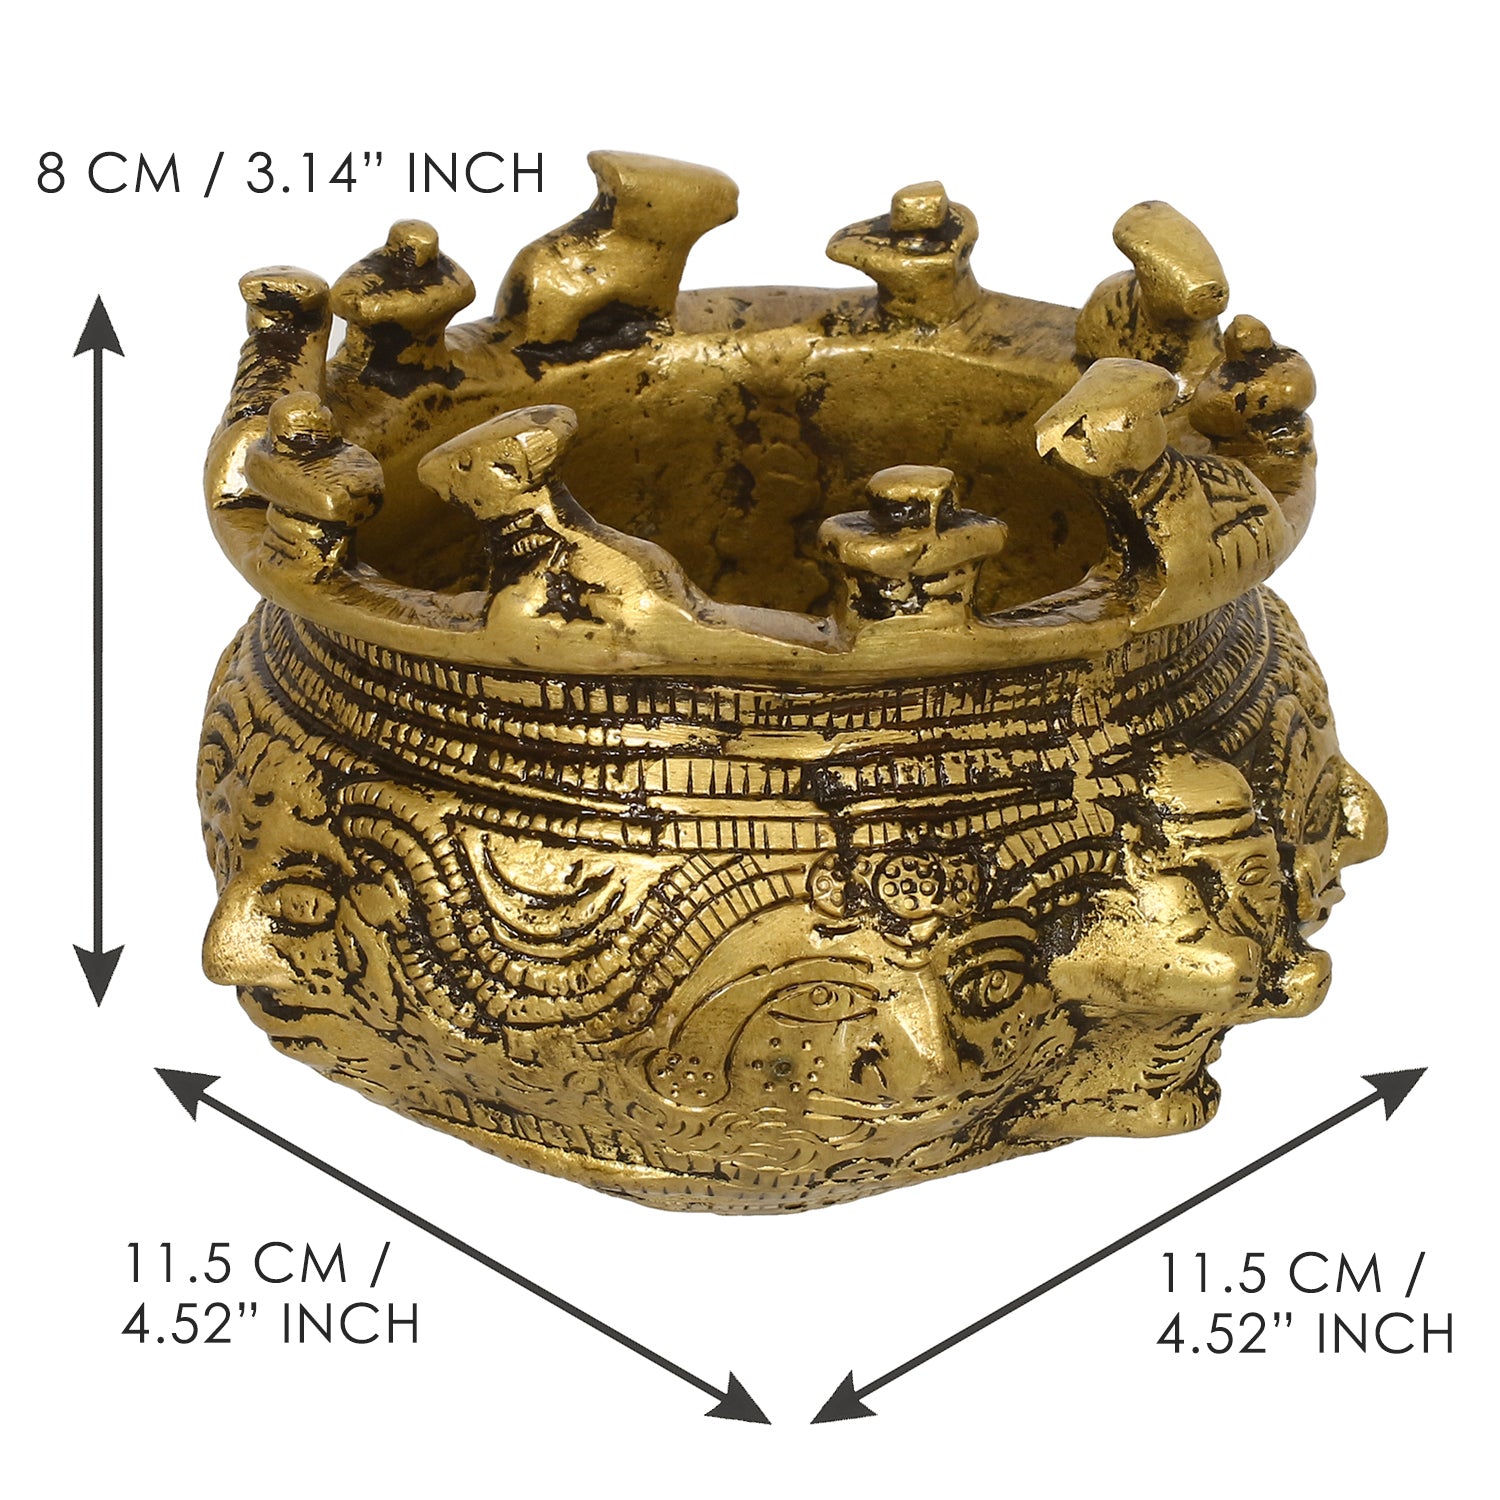 Golden Brass Auspicious Kalash, Shivling And Nandi On The Rim Of The Kalash/Pot For Religious Offerings 3